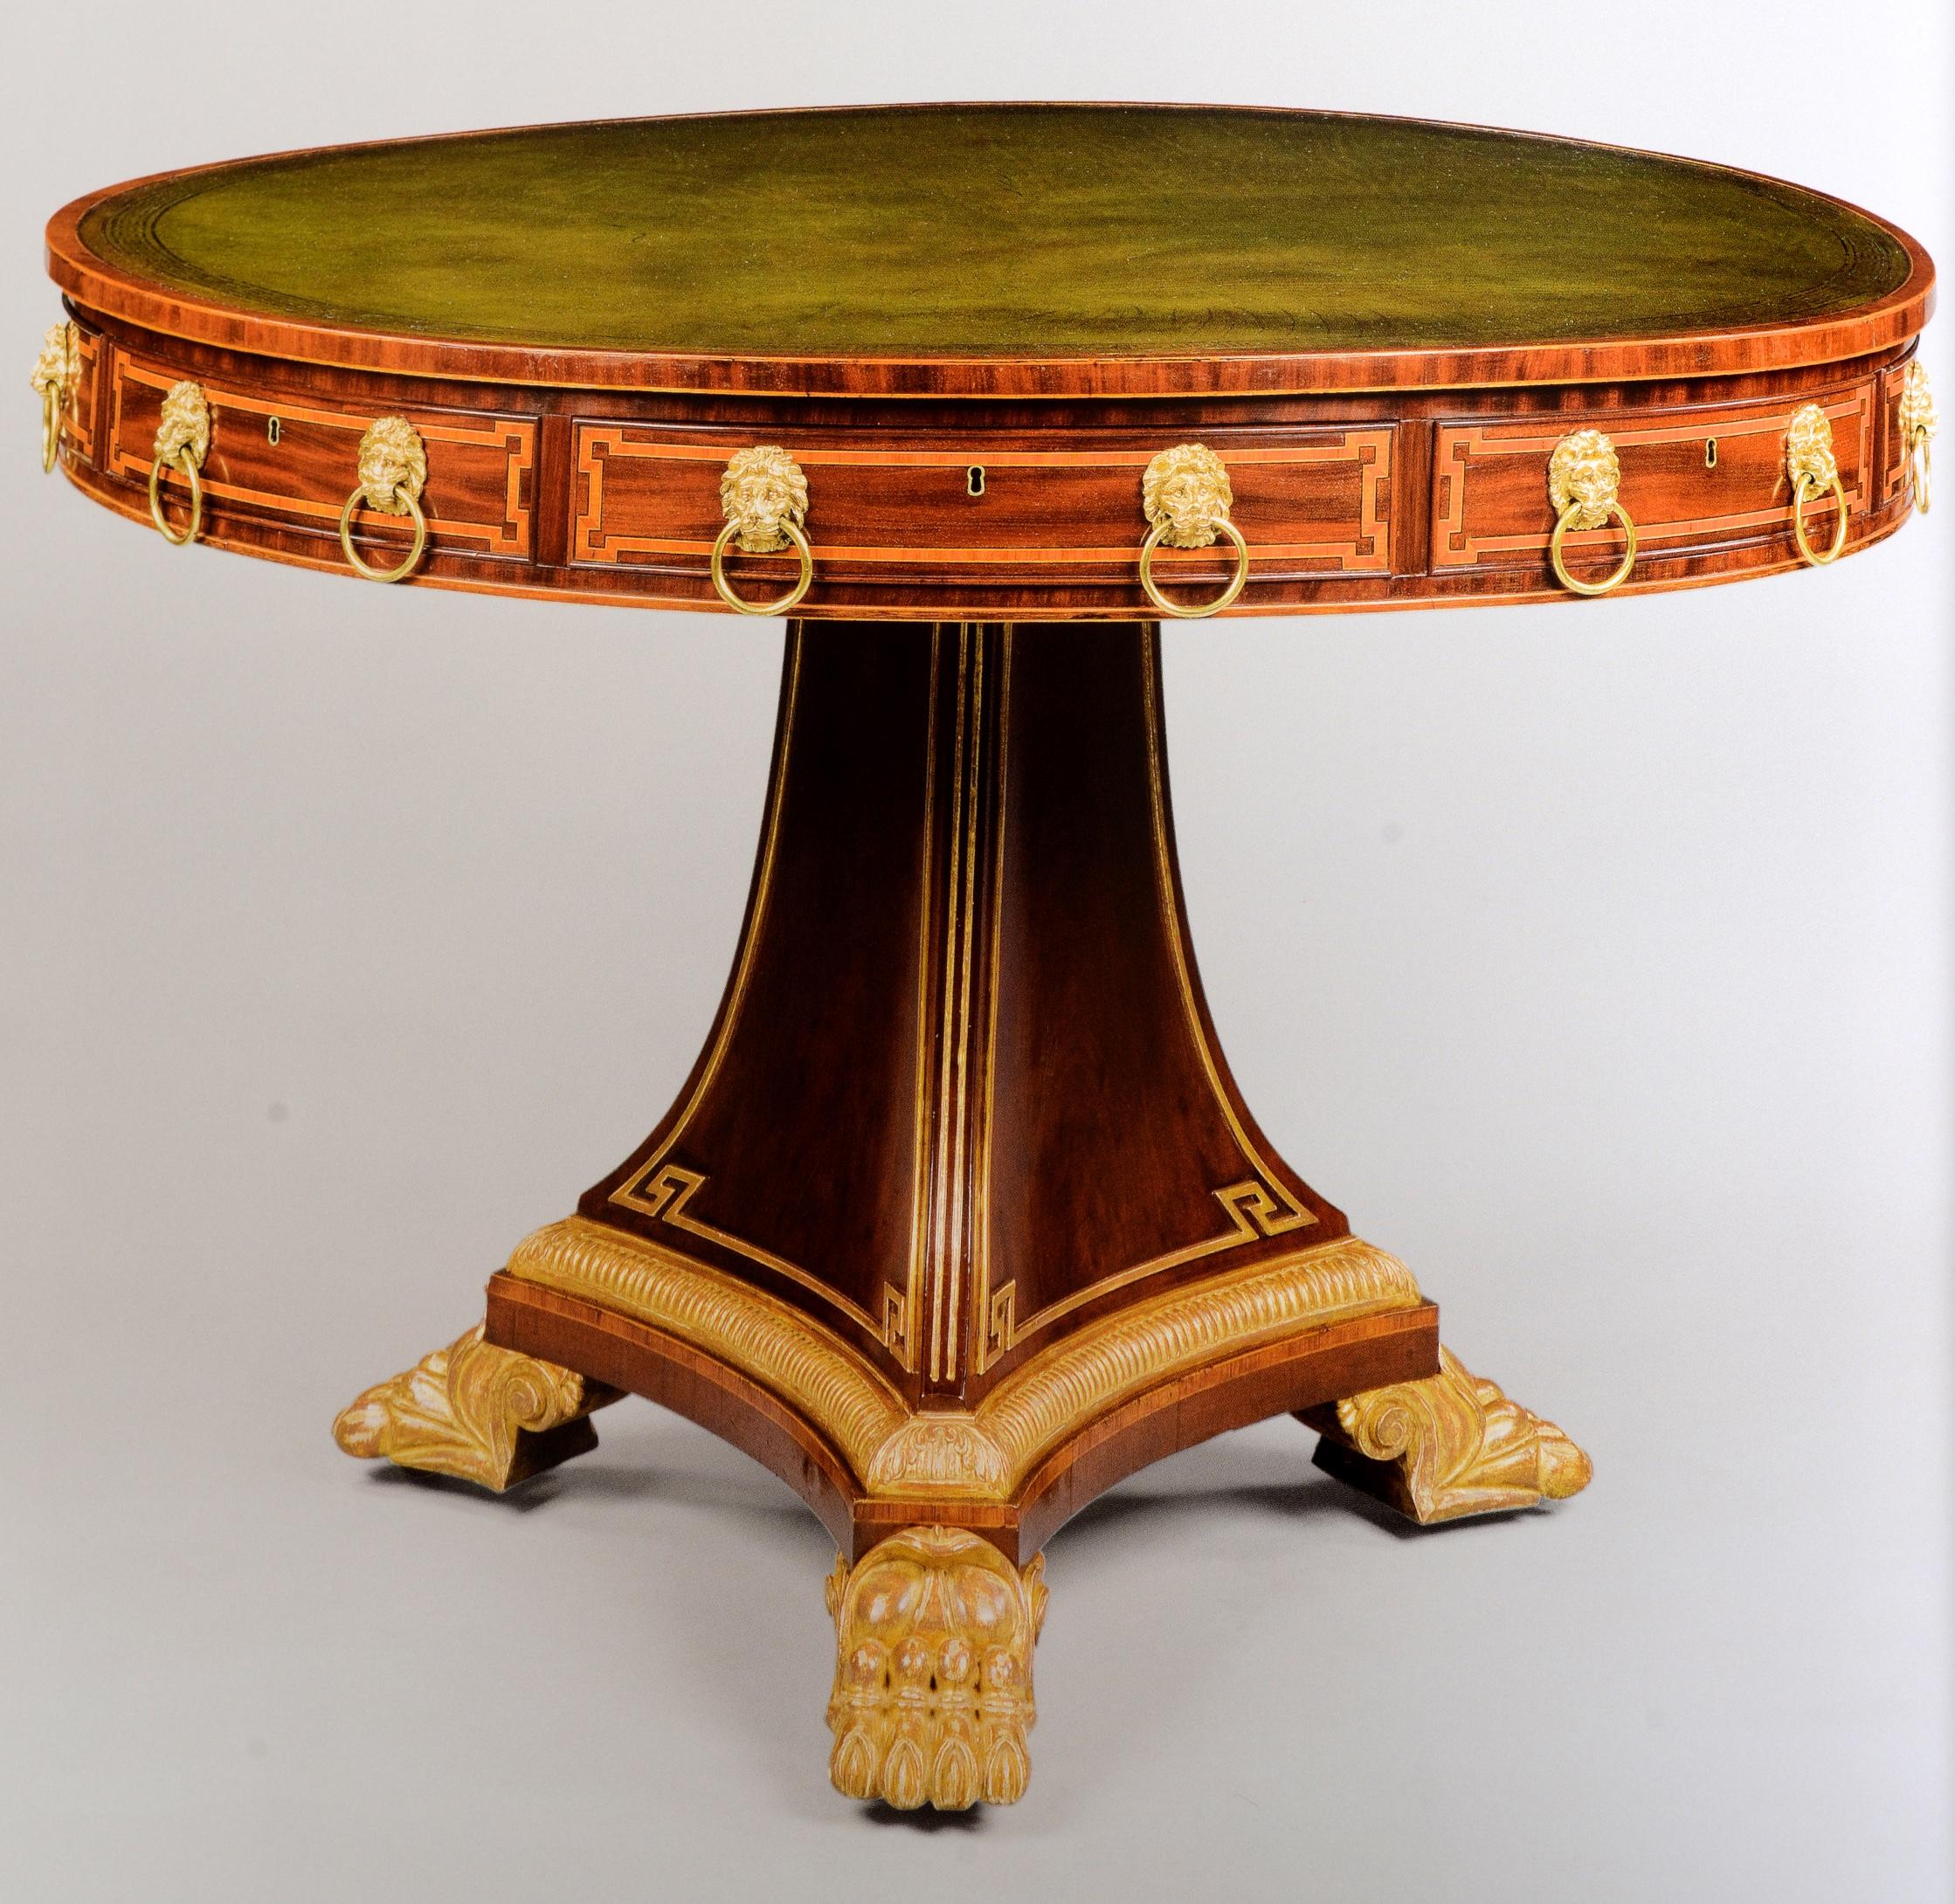 Exceptional Furniture & Works of Art by Mallett & Son Antiques, First Edition For Sale 13